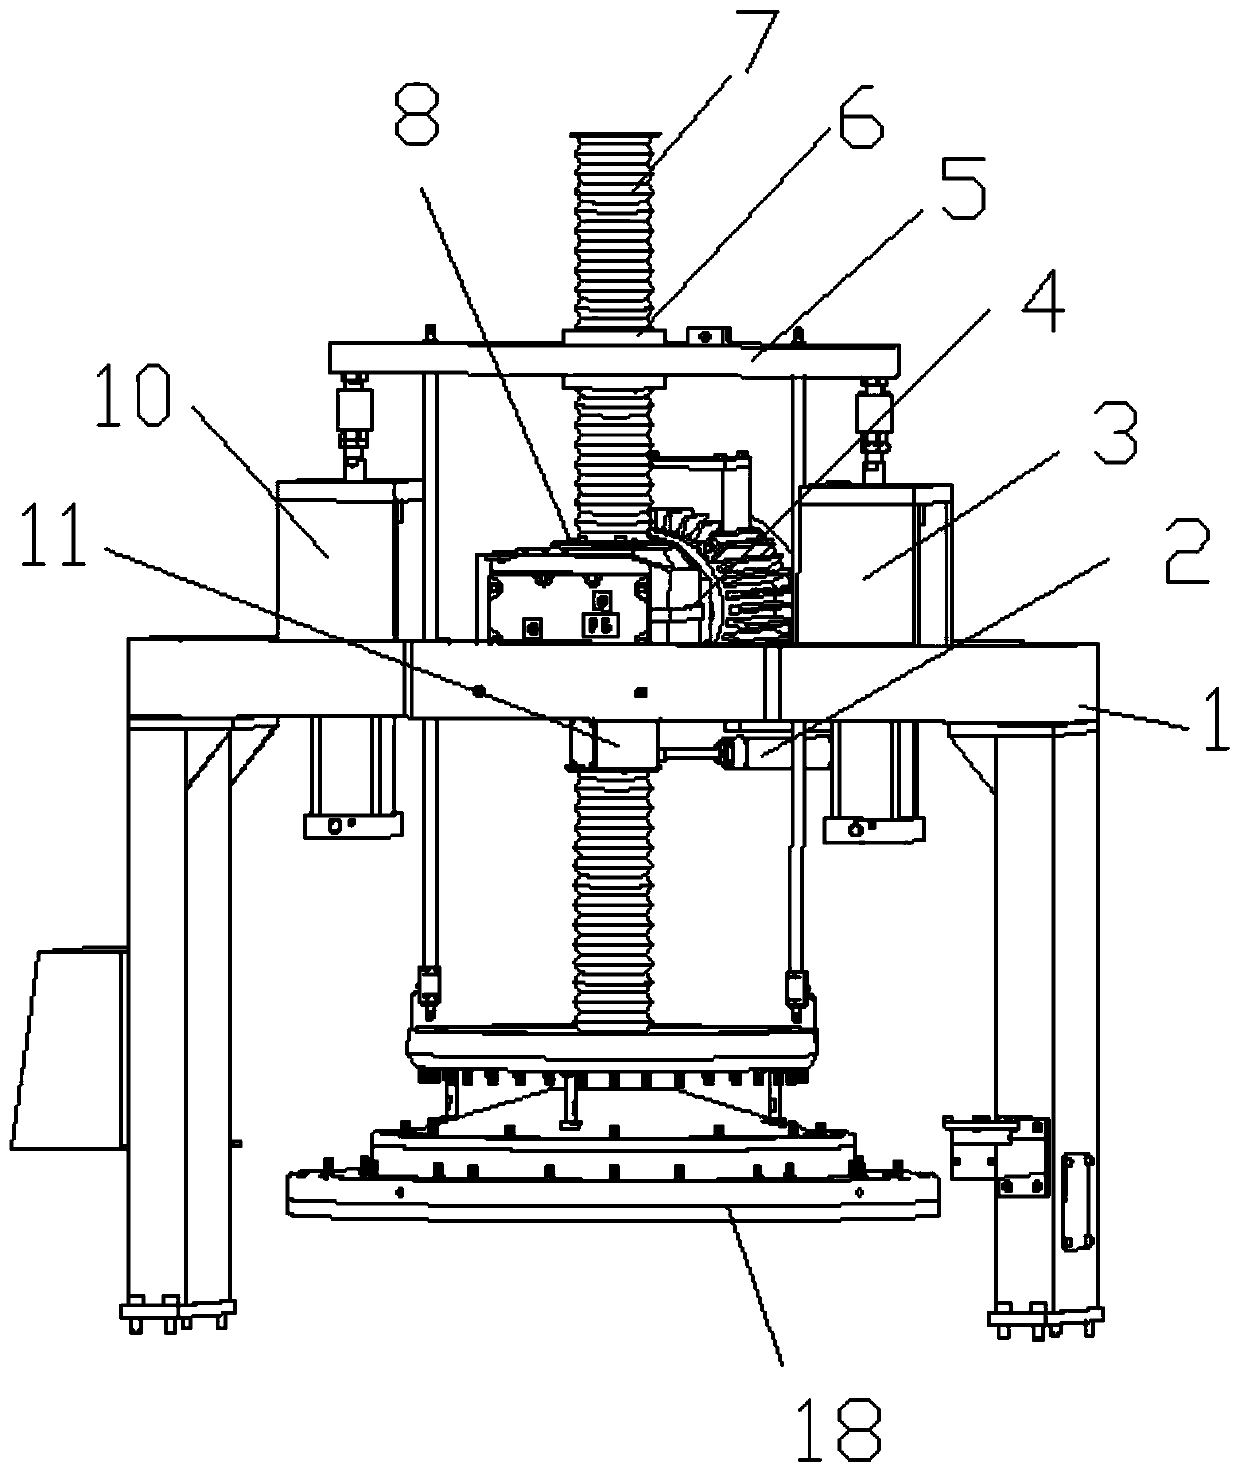 Upper grinding mechanism with dynamic grinding function